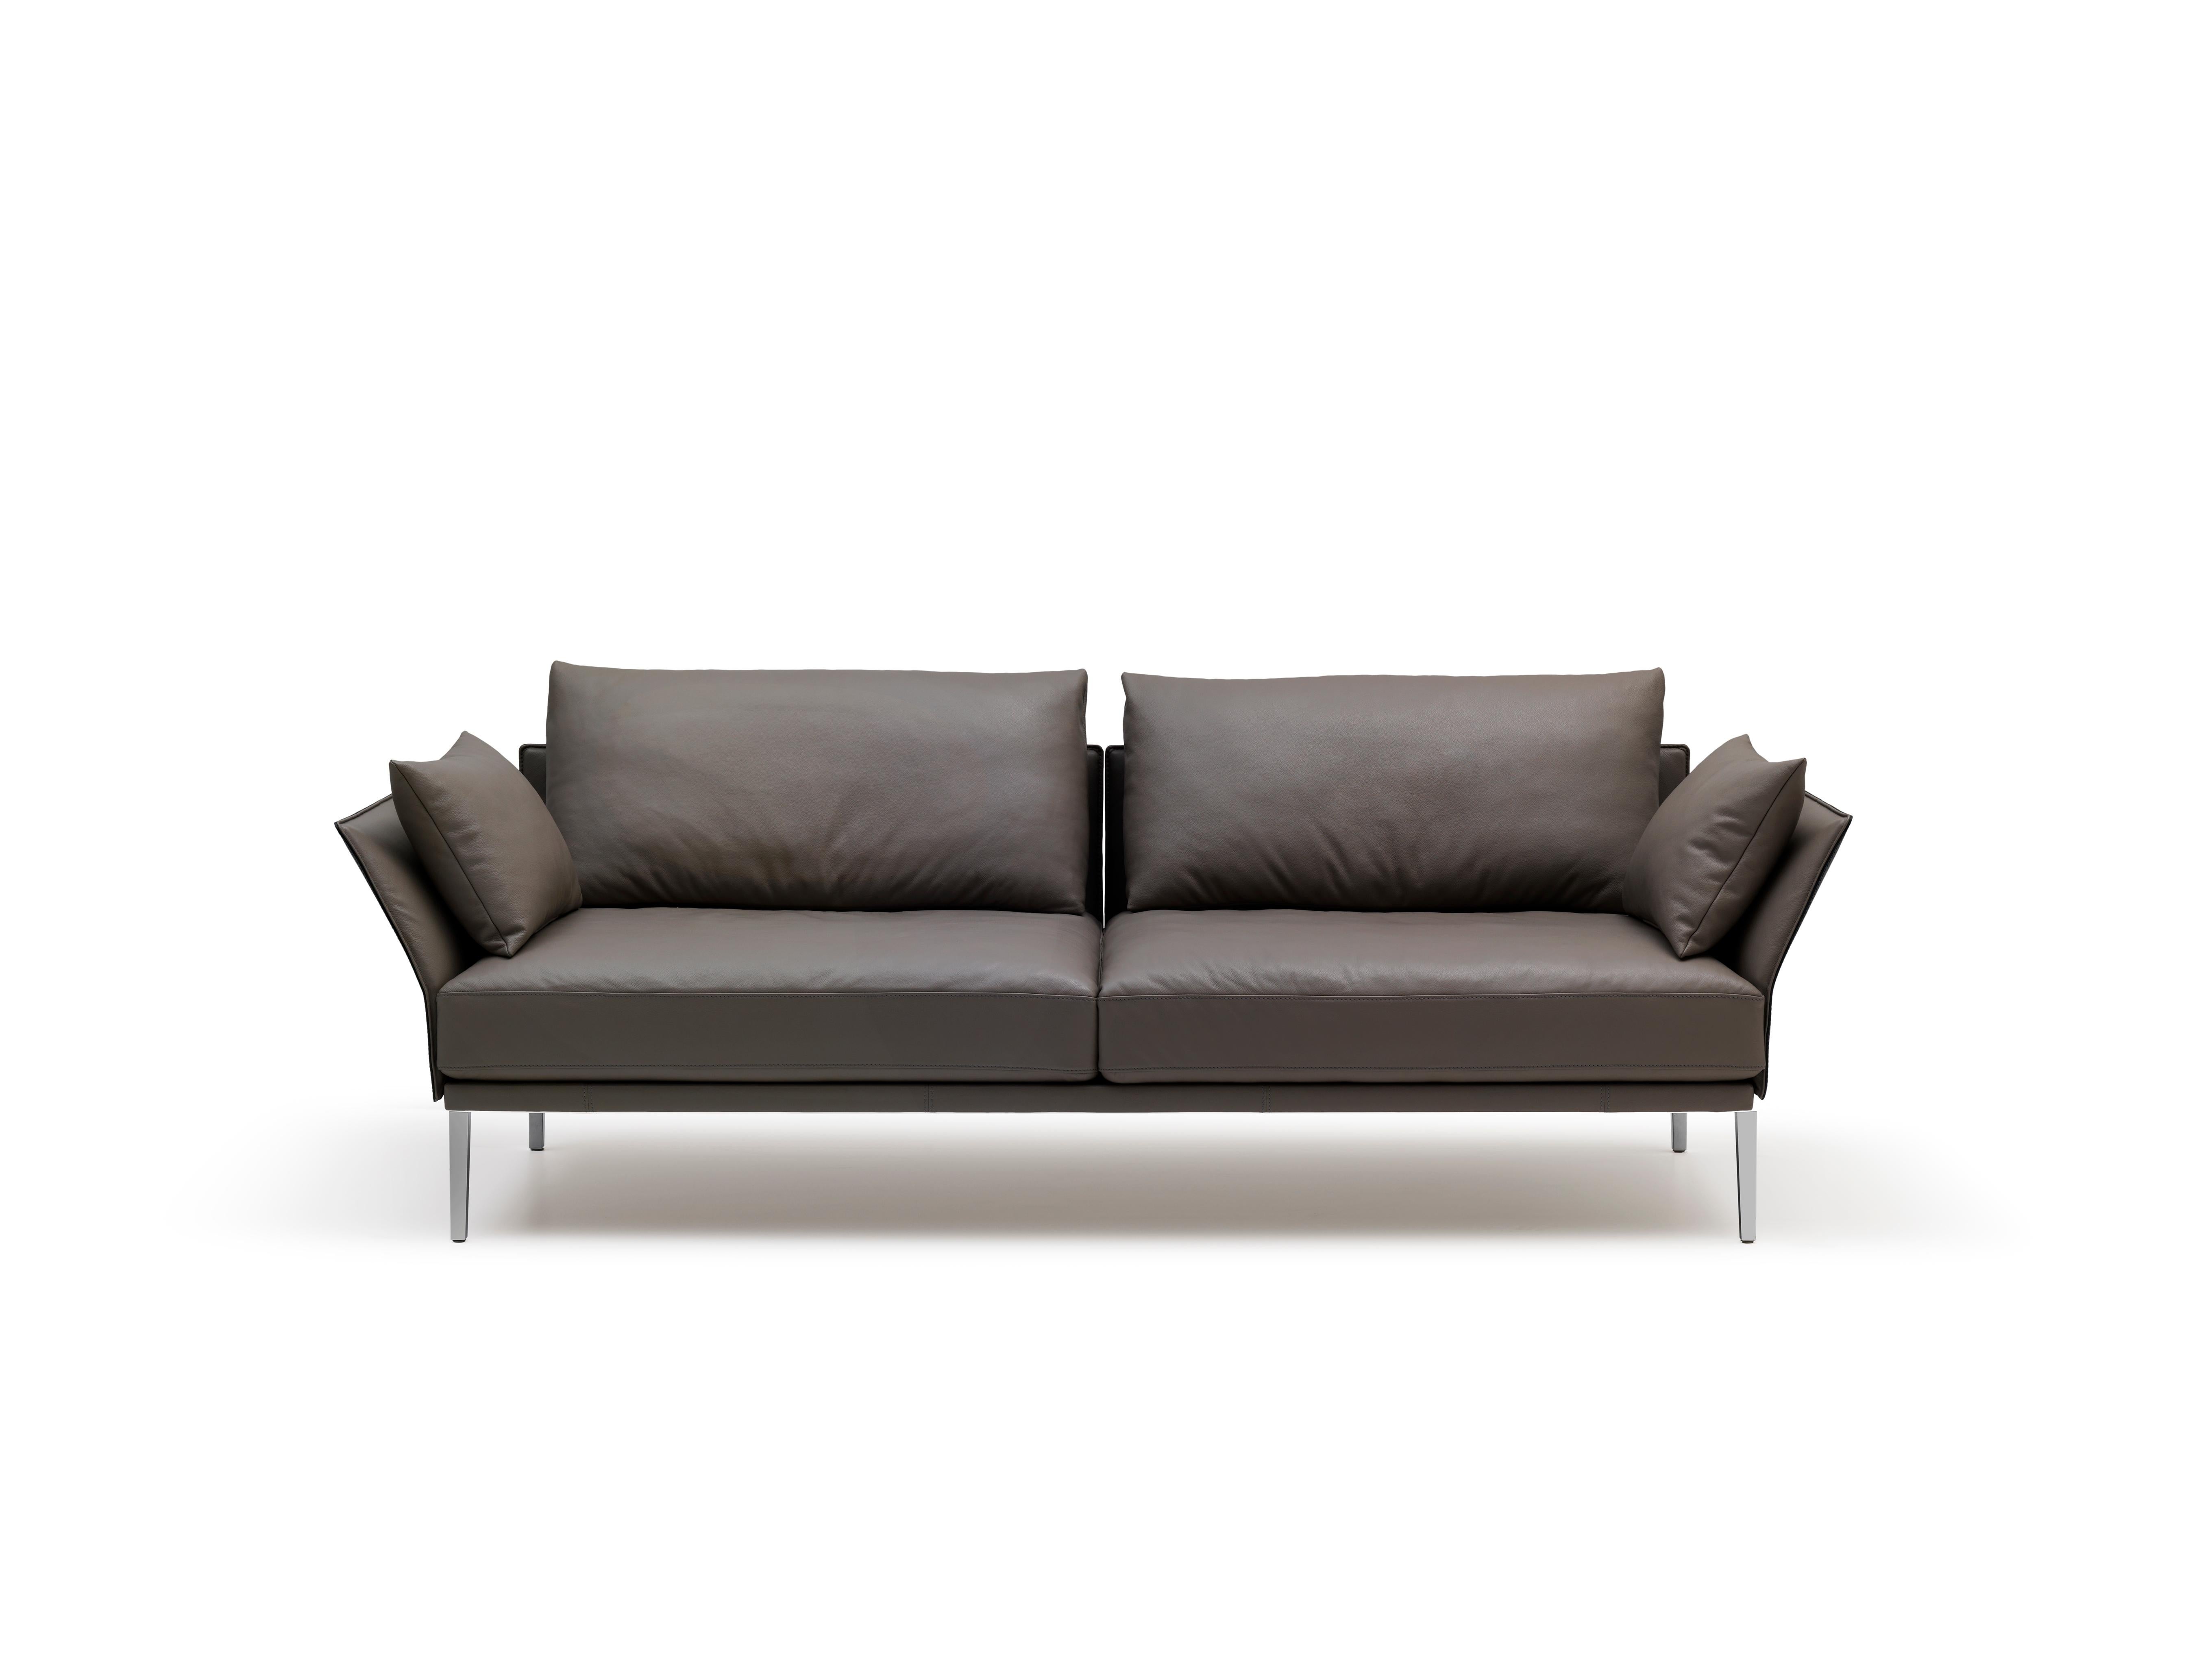 Set of DS-333 sofa and cushions by De Sede
Set of 4 cushions and 1 sofa
Design: Christian Werner
Dimensions: 
Sofa: D 58 x W 198 x H 78 cm
Backrest cushion/ armrest cushion: D 14/15 x W 50 x H 32 cm
Materials: aluminum, leather.

Prices may